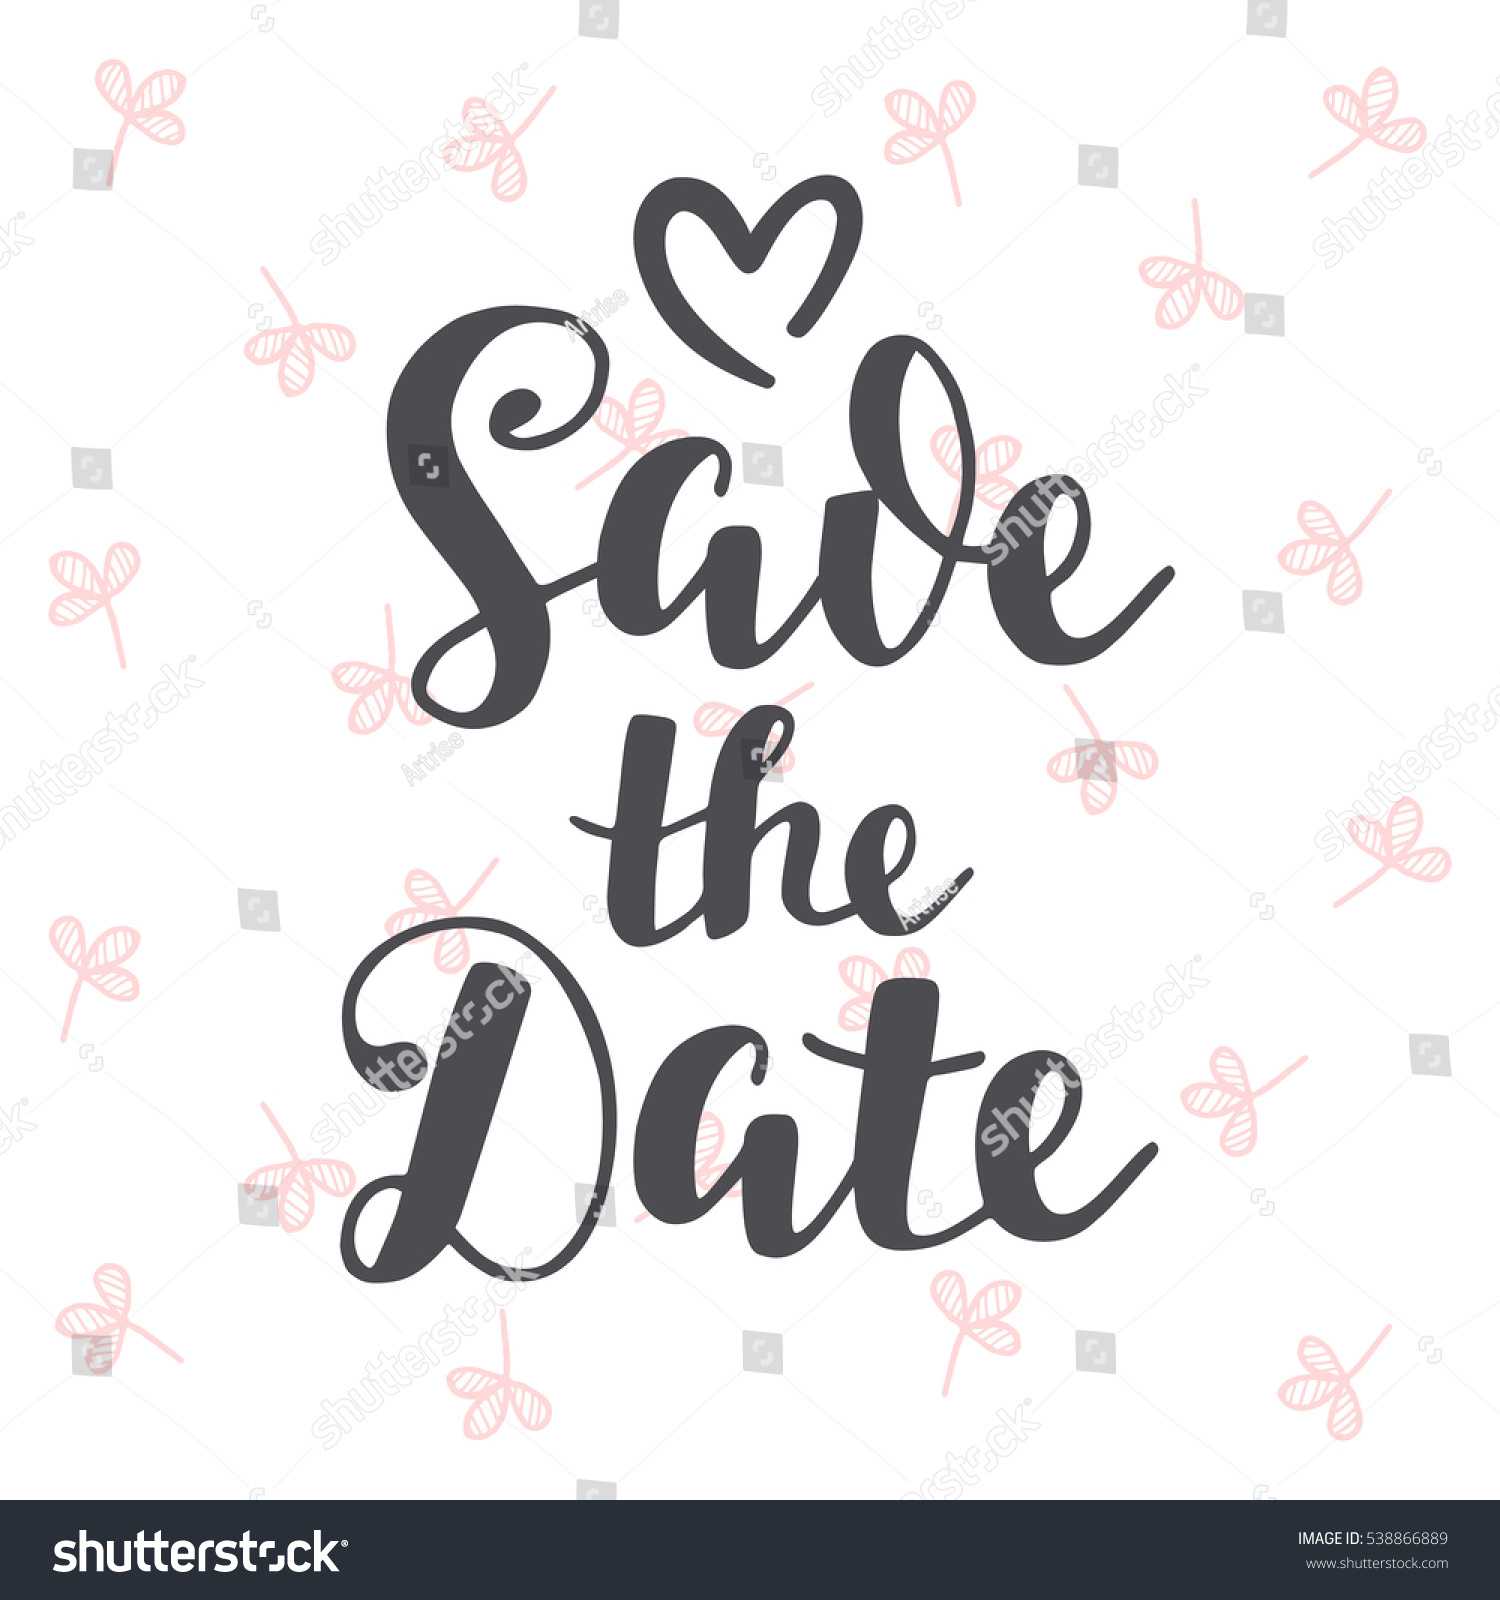 Save Date Vintage Hand Written Lettering Stock Vector In Save The Date Banner Template